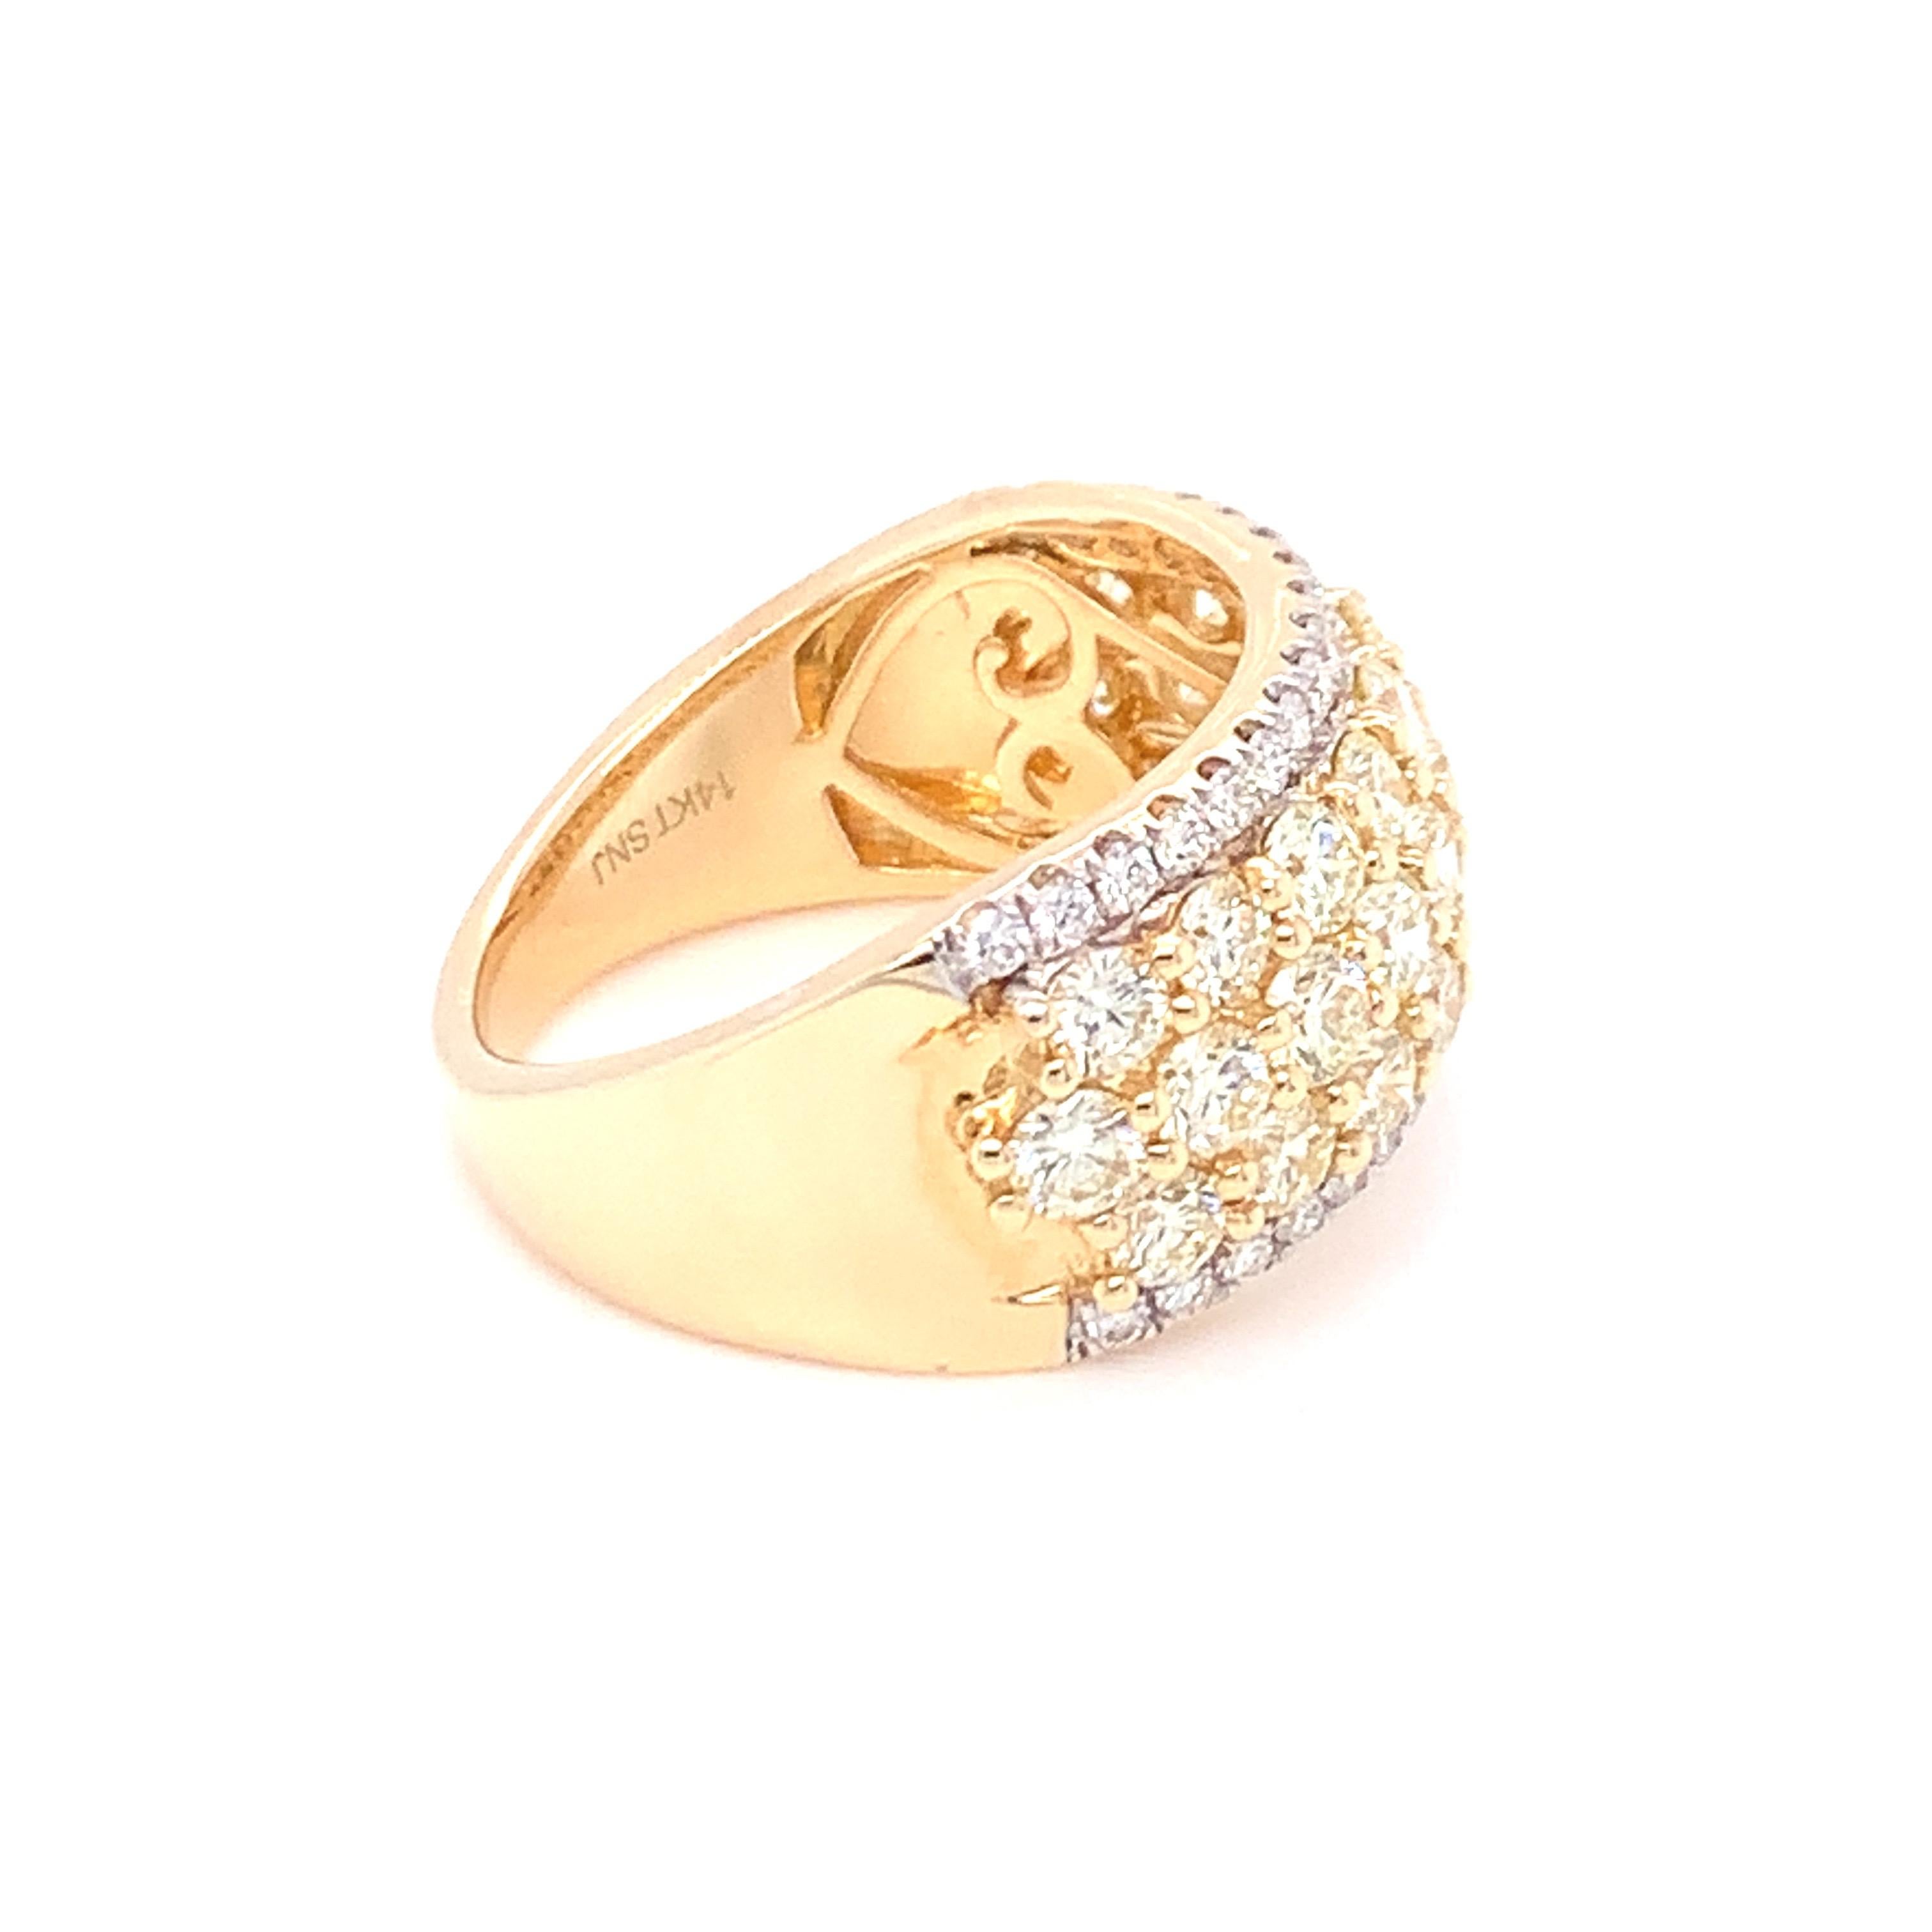 2.50 Carat Yellow & White Diamond Band Ring in 14k Yellow Gold For Sale 8